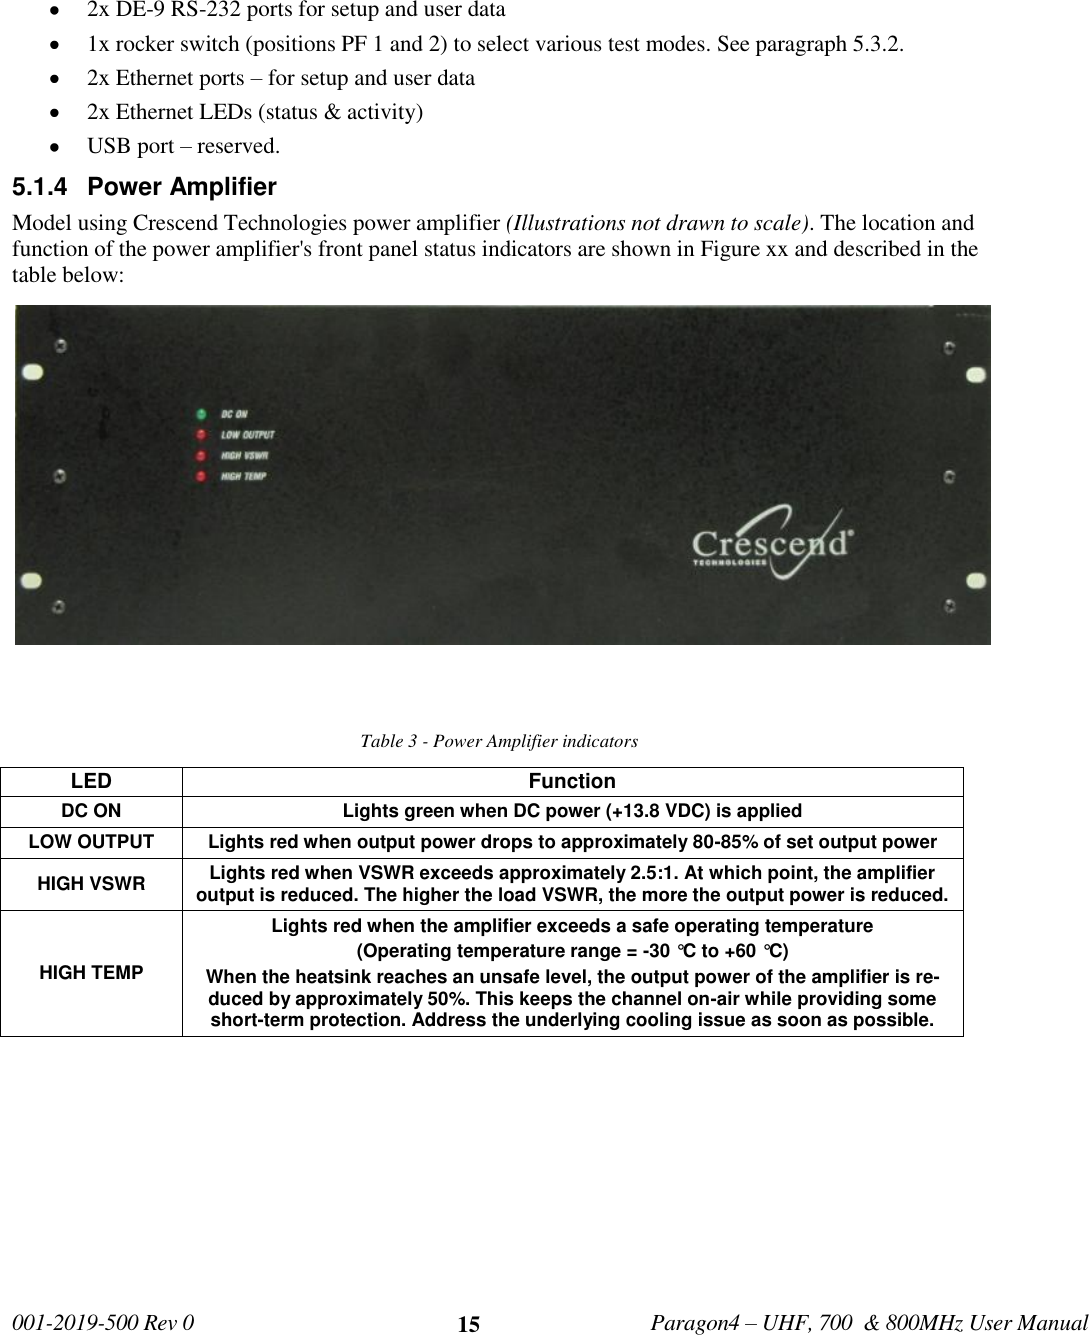   001-2019-500 Rev 0         Paragon4 – UHF, 700  &amp; 800MHz User Manual     15    2x DE-9 RS-232 ports for setup and user data  1x rocker switch (positions PF 1 and 2) to select various test modes. See paragraph 5.3.2.   2x Ethernet ports – for setup and user data  2x Ethernet LEDs (status &amp; activity)   USB port – reserved.  5.1.4  Power Amplifier Model using Crescend Technologies power amplifier (Illustrations not drawn to scale). The location and function of the power amplifier&apos;s front panel status indicators are shown in Figure xx and described in the table below:   Table 3 - Power Amplifier indicators       LED Function DC ON Lights green when DC power (+13.8 VDC) is applied LOW OUTPUT Lights red when output power drops to approximately 80-85% of set output power HIGH VSWR Lights red when VSWR exceeds approximately 2.5:1. At which point, the amplifier output is reduced. The higher the load VSWR, the more the output power is reduced. HIGH TEMP Lights red when the amplifier exceeds a safe operating temperature (Operating temperature range = -30 °C to +60 °C) When the heatsink reaches an unsafe level, the output power of the amplifier is re-duced by approximately 50%. This keeps the channel on-air while providing some short-term protection. Address the underlying cooling issue as soon as possible. 